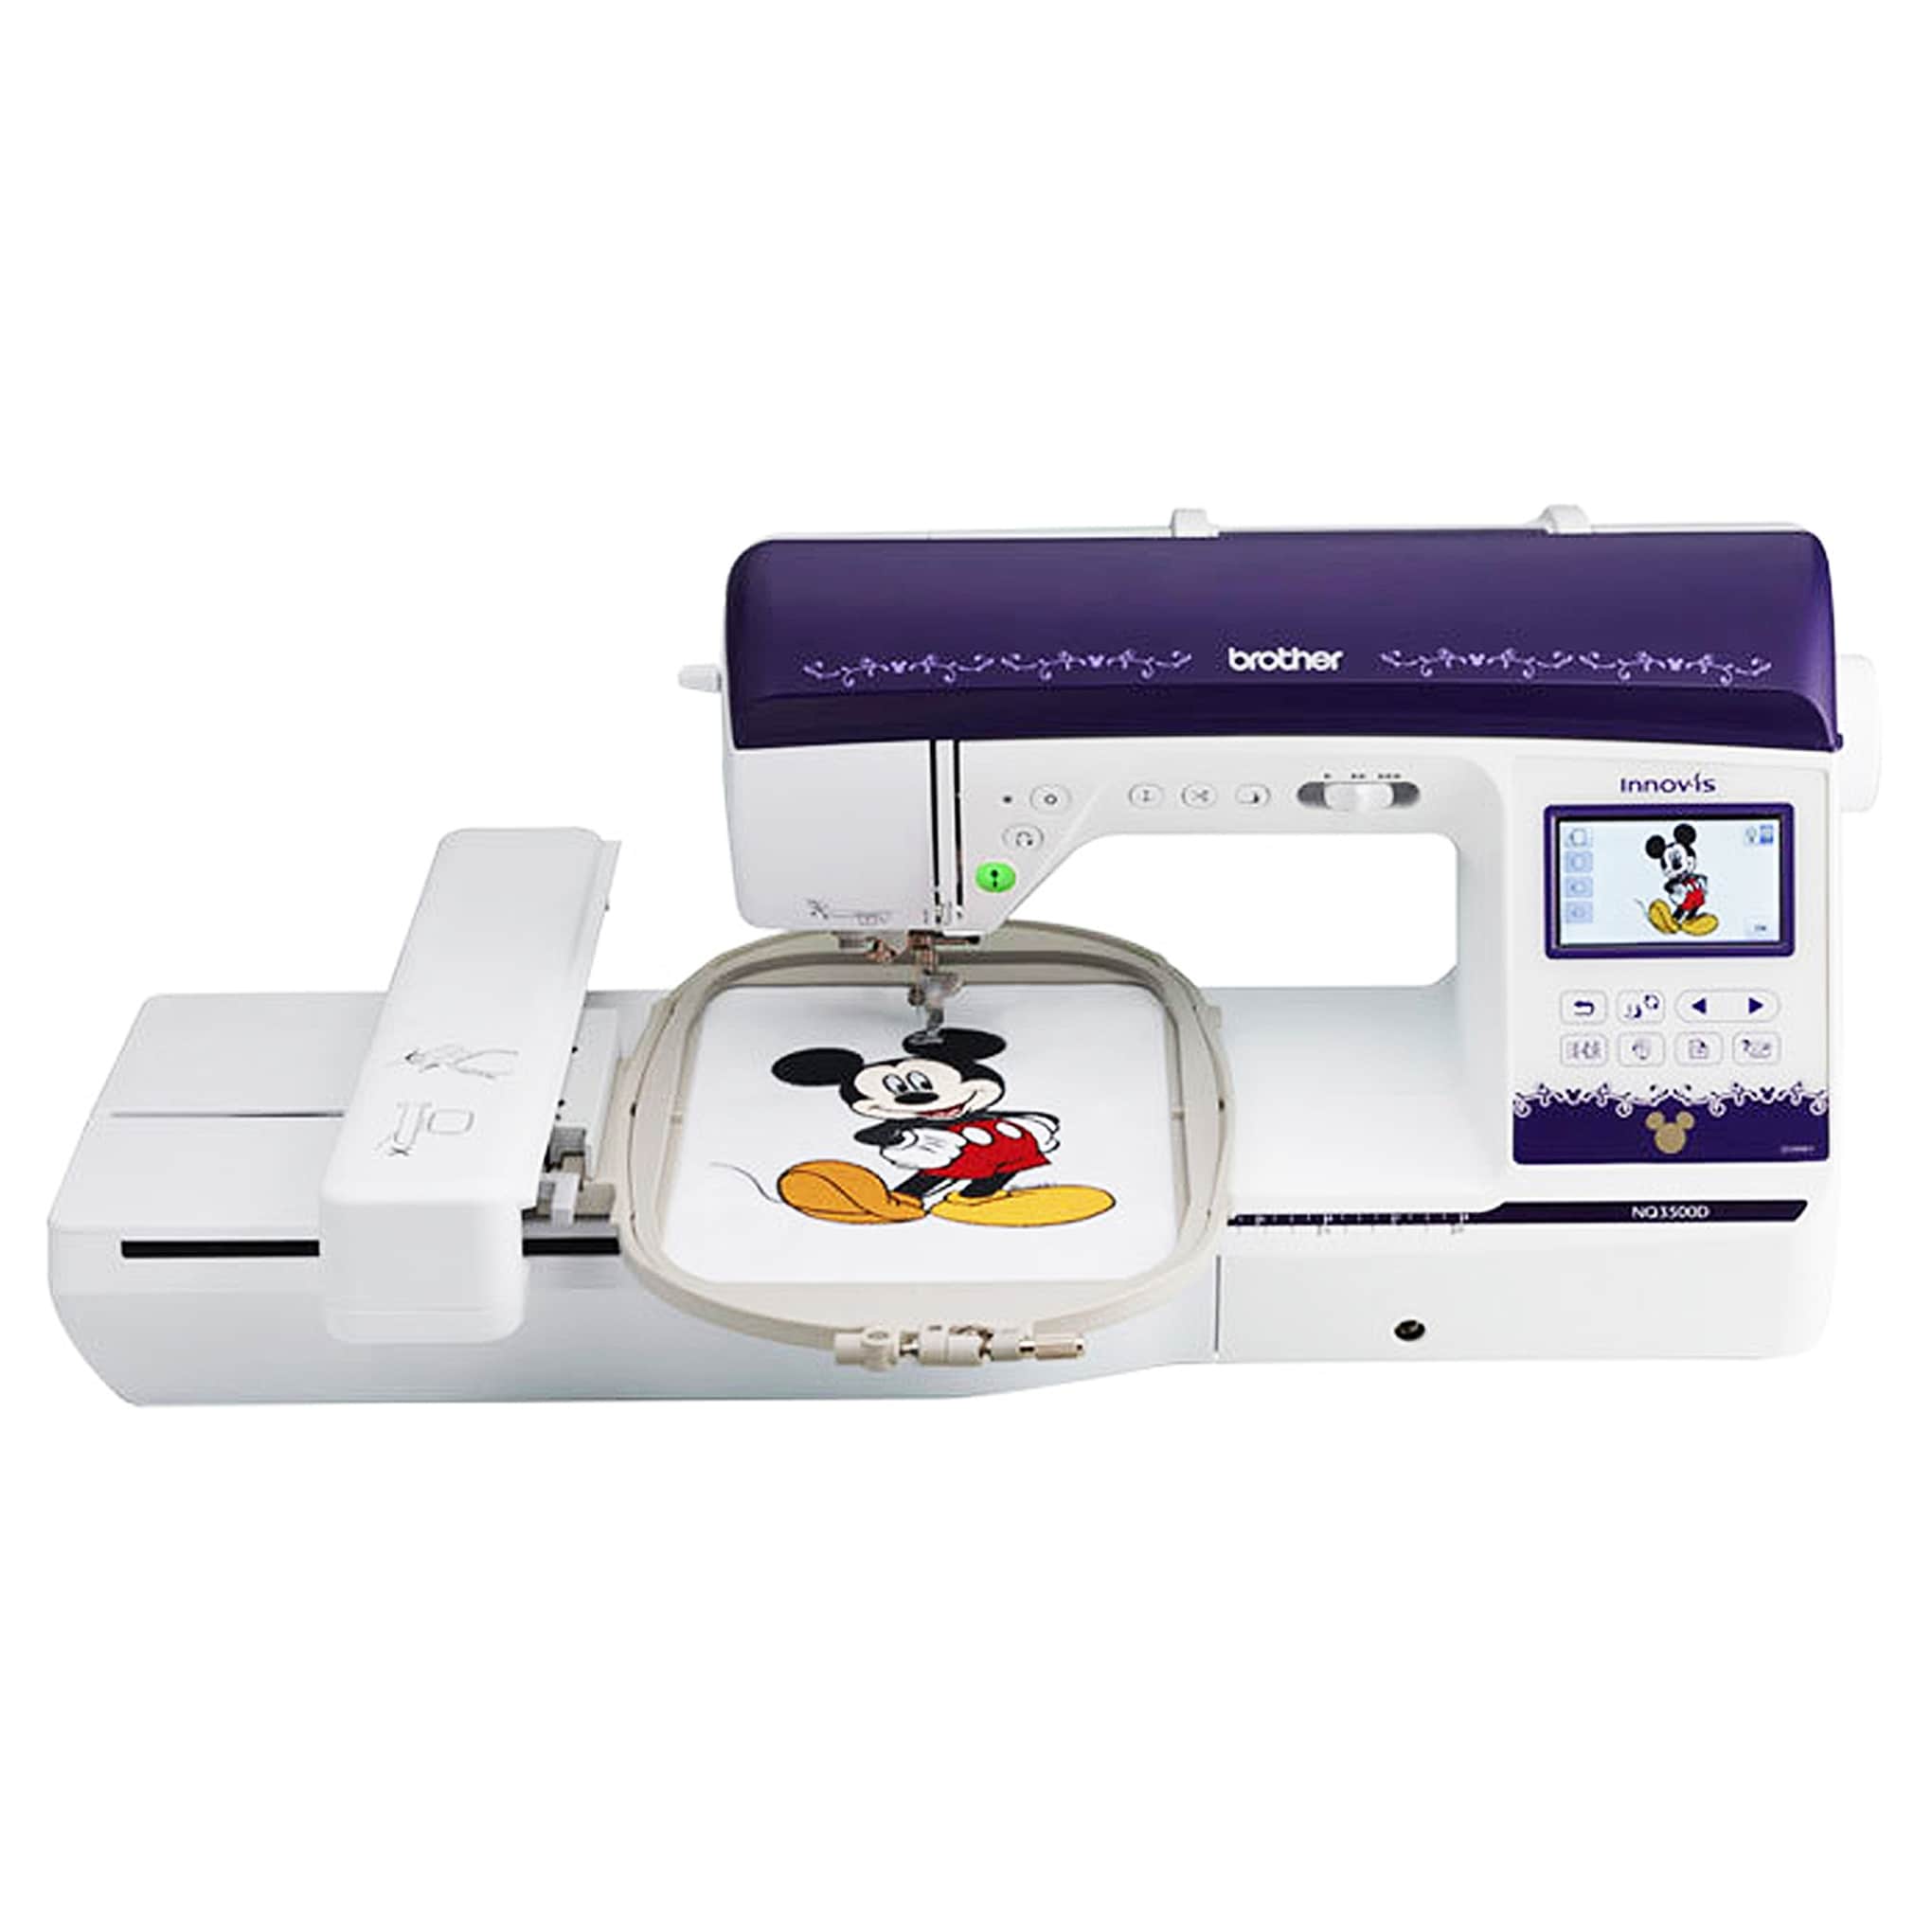 Brother Elite PE900 Large Embroidery Machine with Wireless LAN